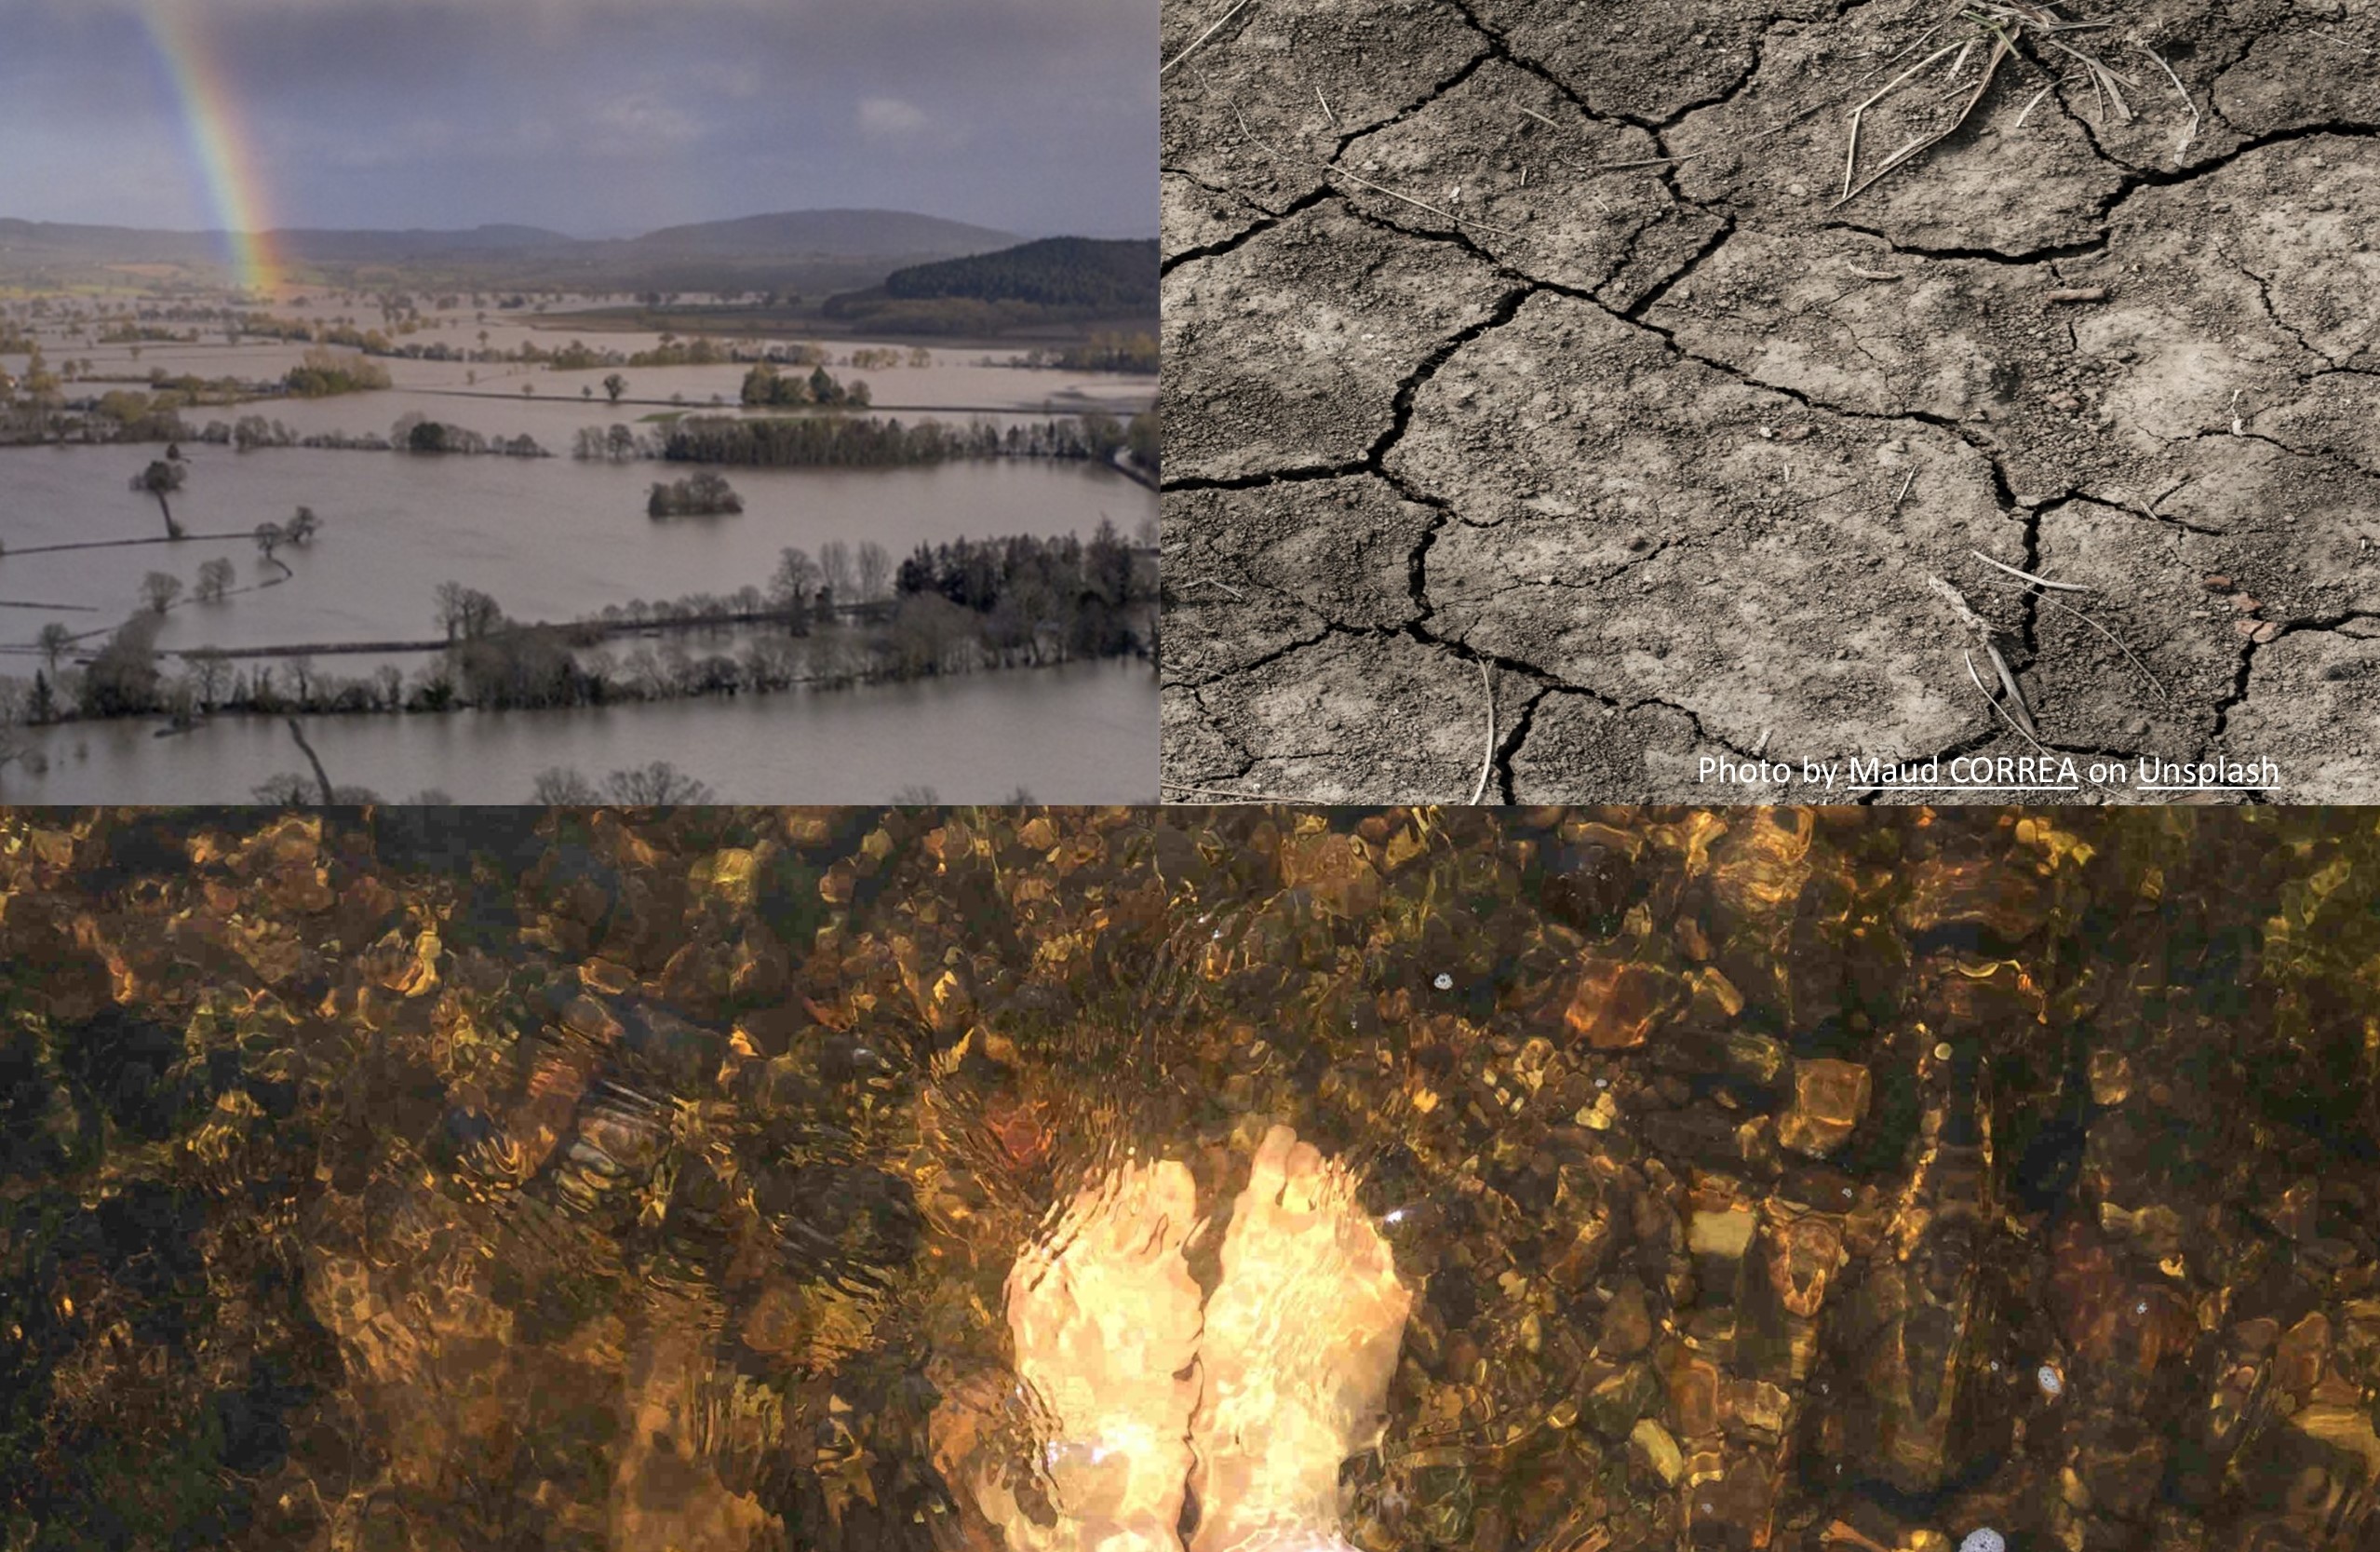 A montage of photographs: Flooded landscape with a rainbow, dry cracked soil, feet paddling in shallow water.